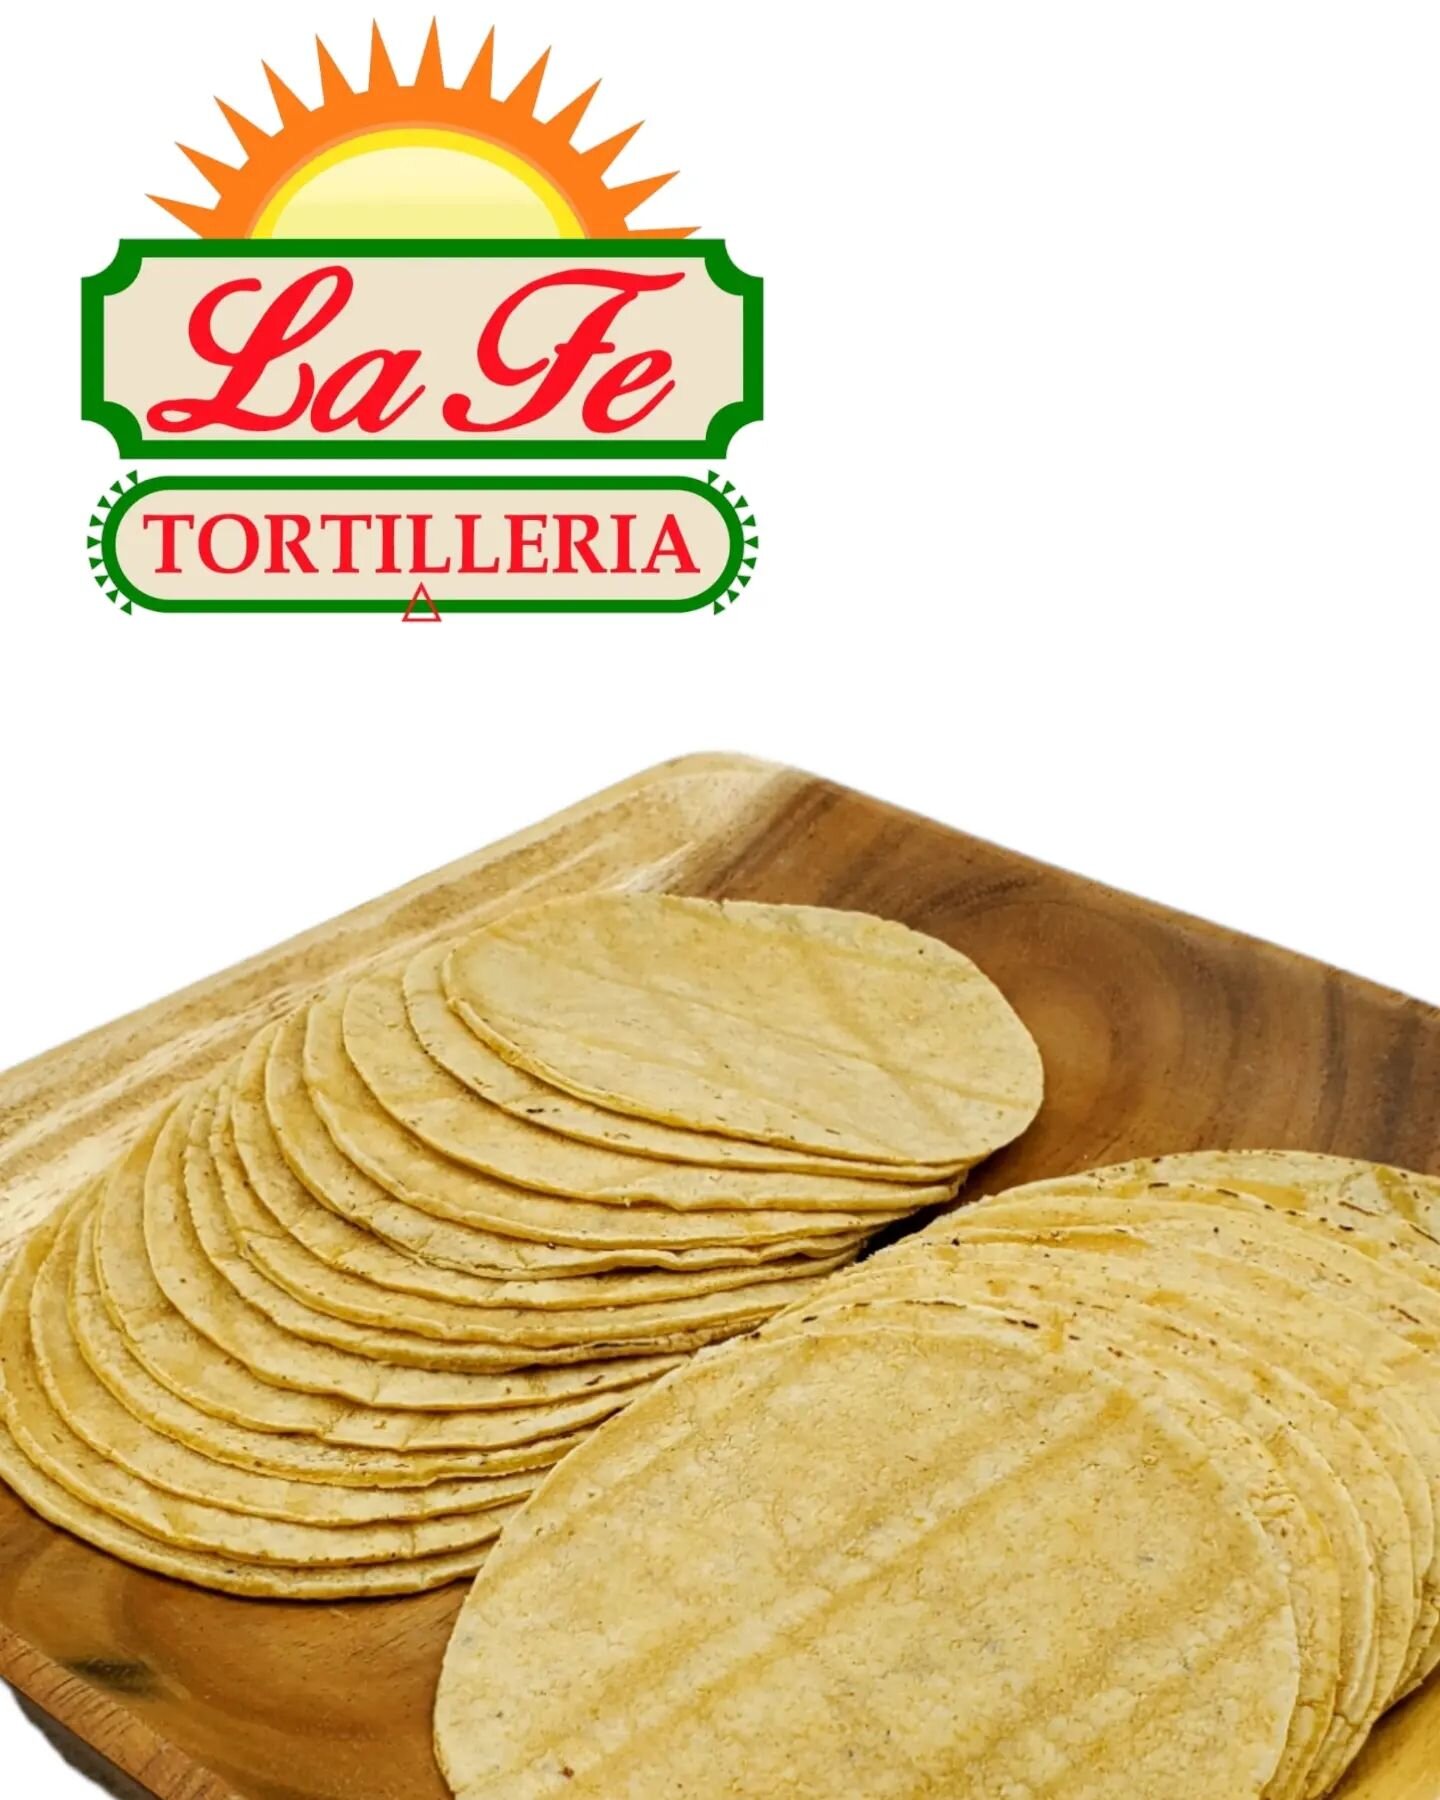 Delicious corn tortillas!
You can find them at your local @sprouts.
&bull;
&bull;
&bull;
&bull;
&bull;
&bull;
#corntortillas #minicorntortillas #tacoaboutit